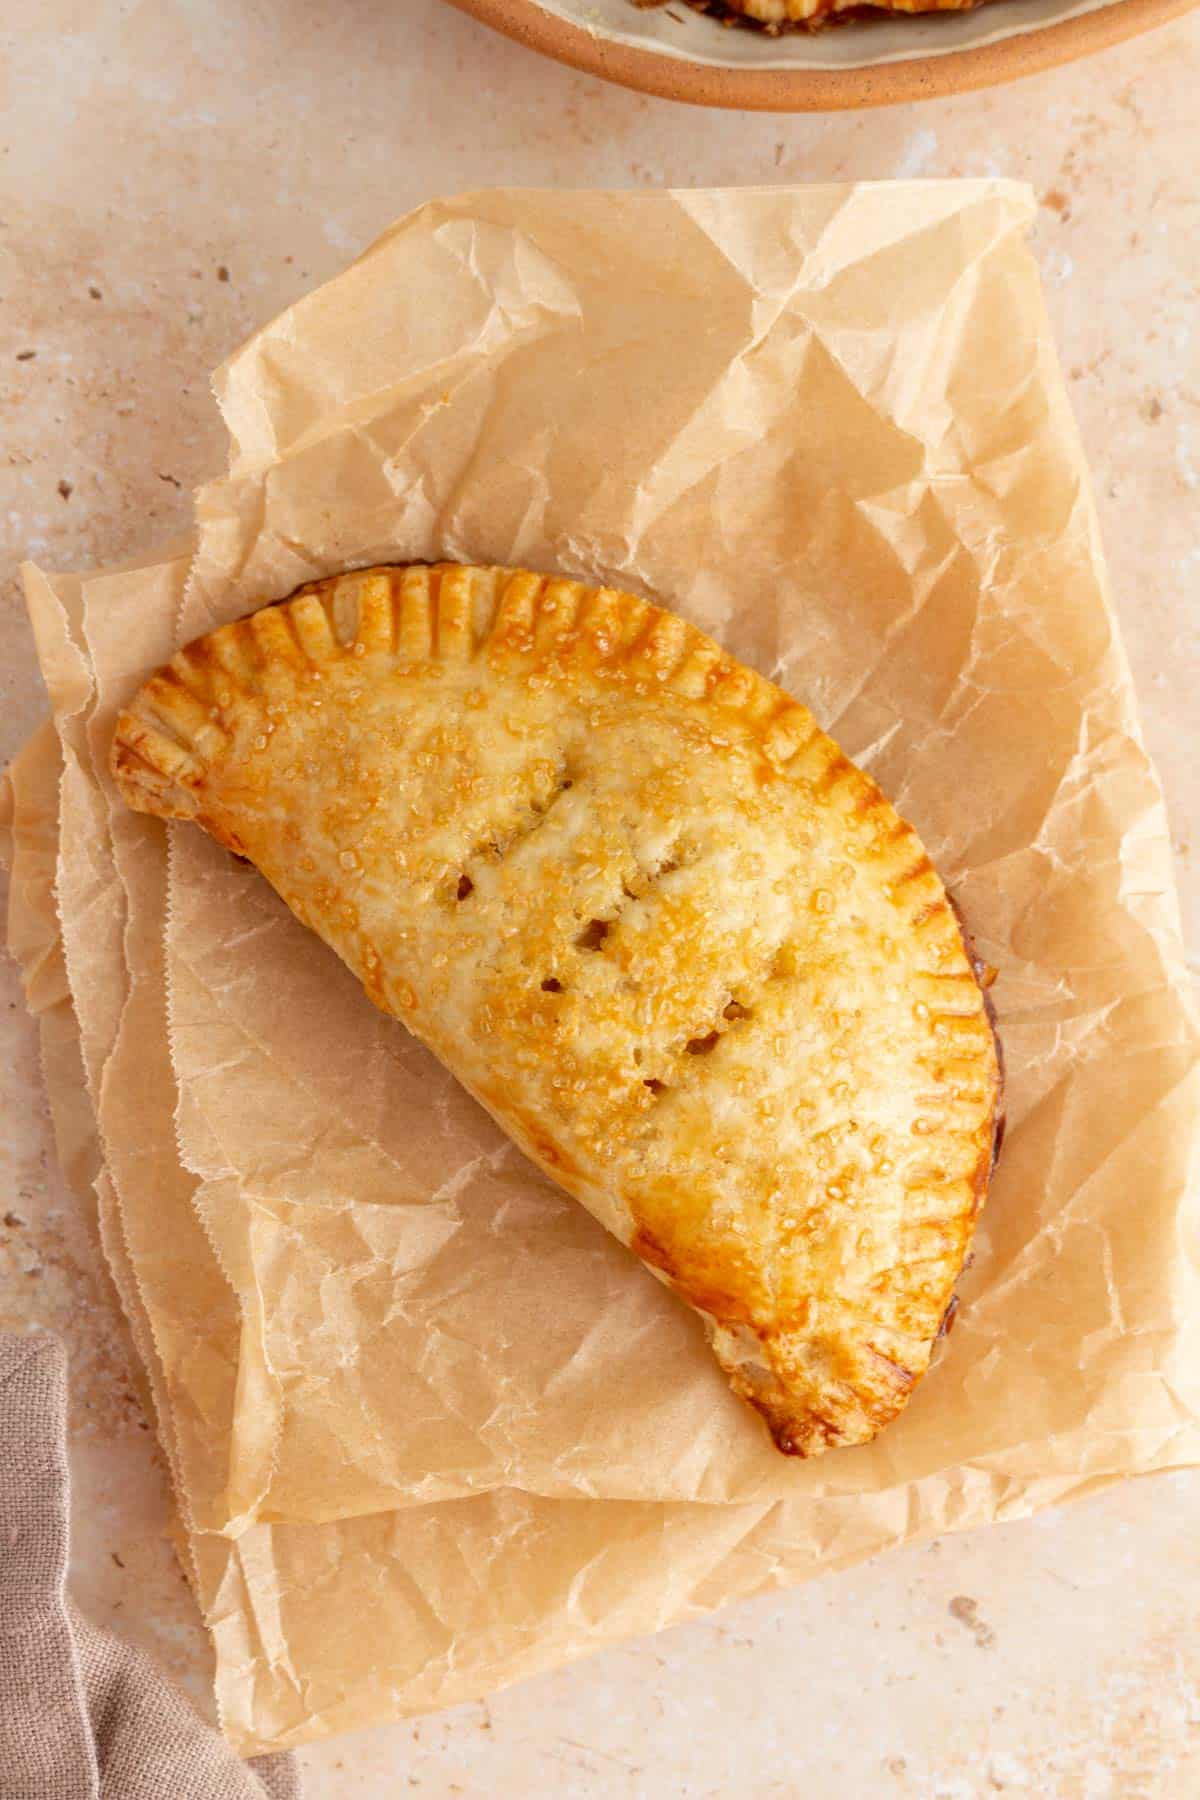 A pumpkin pasty on crinkled brown parchment paper.